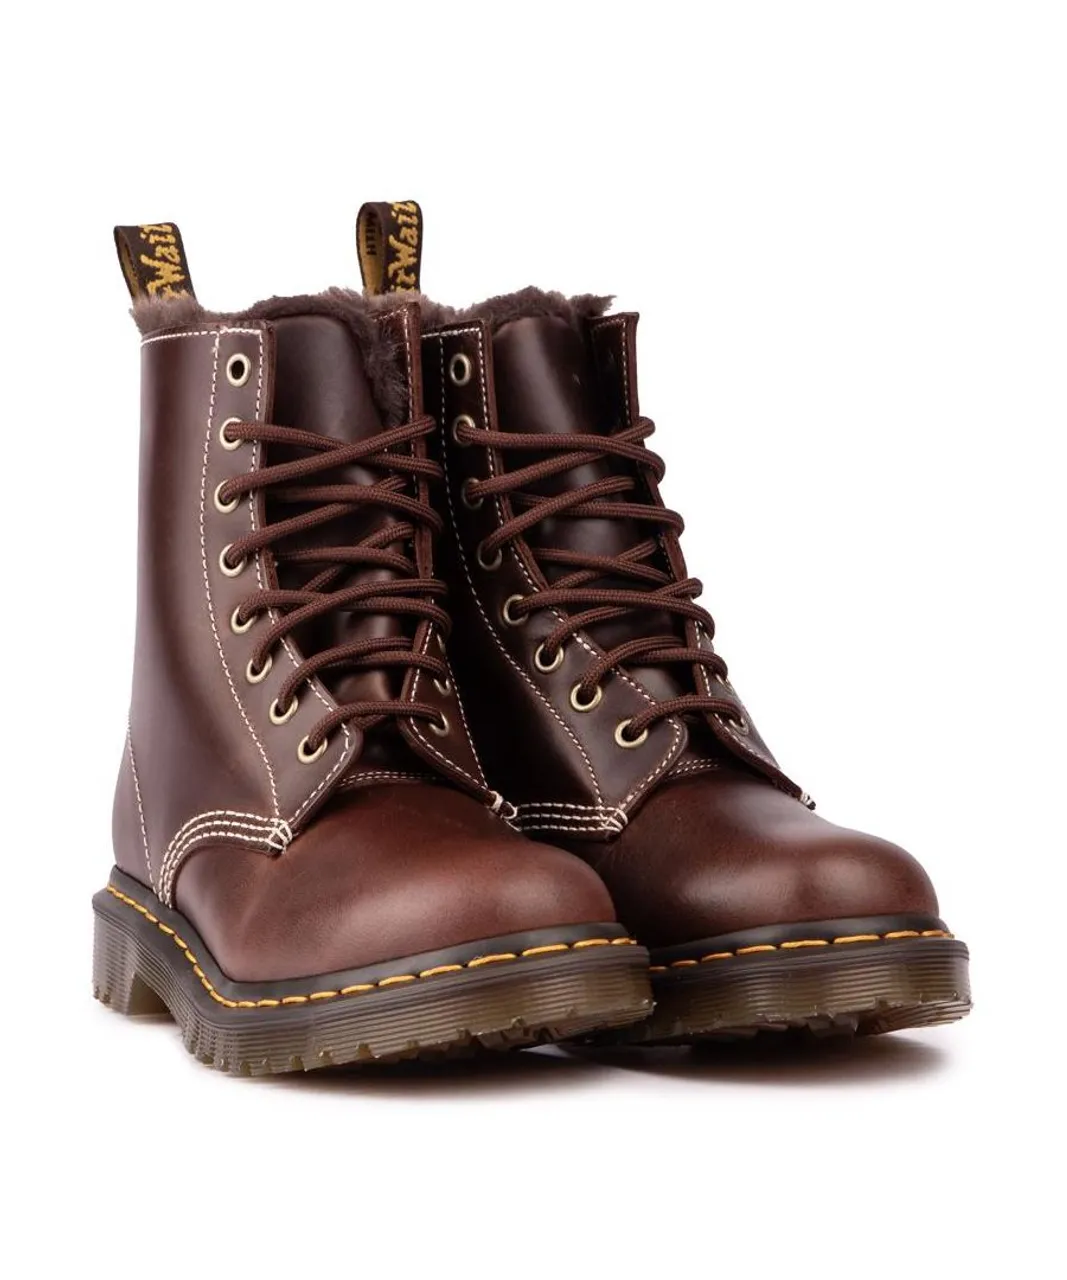 Dr Martens Womens 1460 Serena Boots - Brown